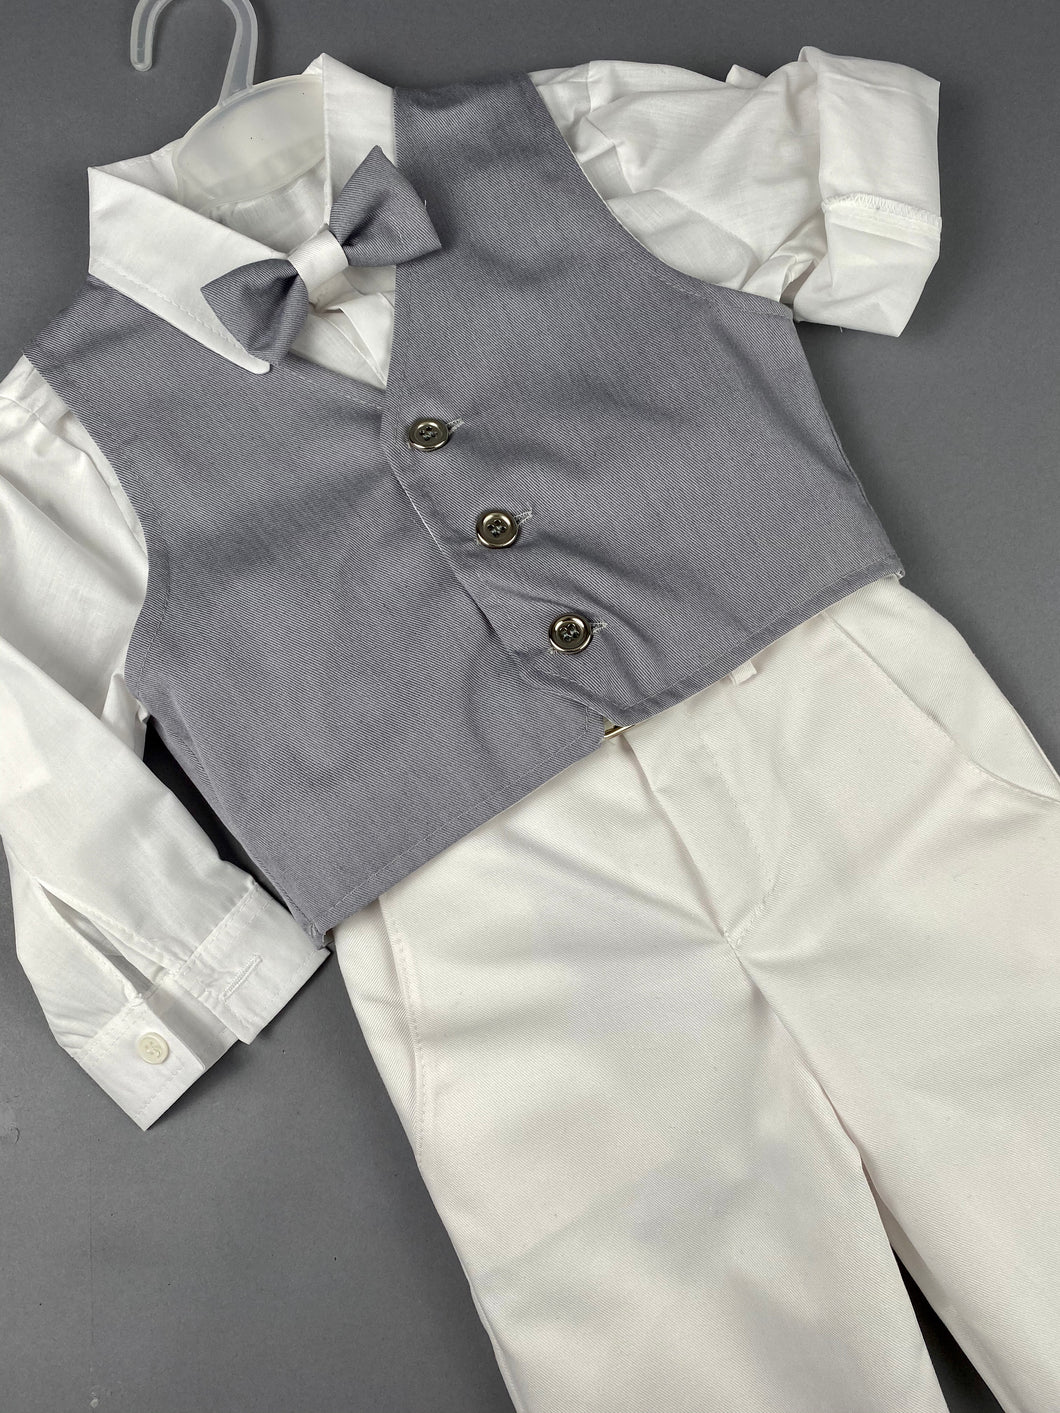 Rosies Collections 7pc full suit, Dress shirt with cuff sleeves, White Pants, Grey Jacket with Grey Vest, Belt or Suspenders, Cap. Made in Greece exclusively for Rosies Collections